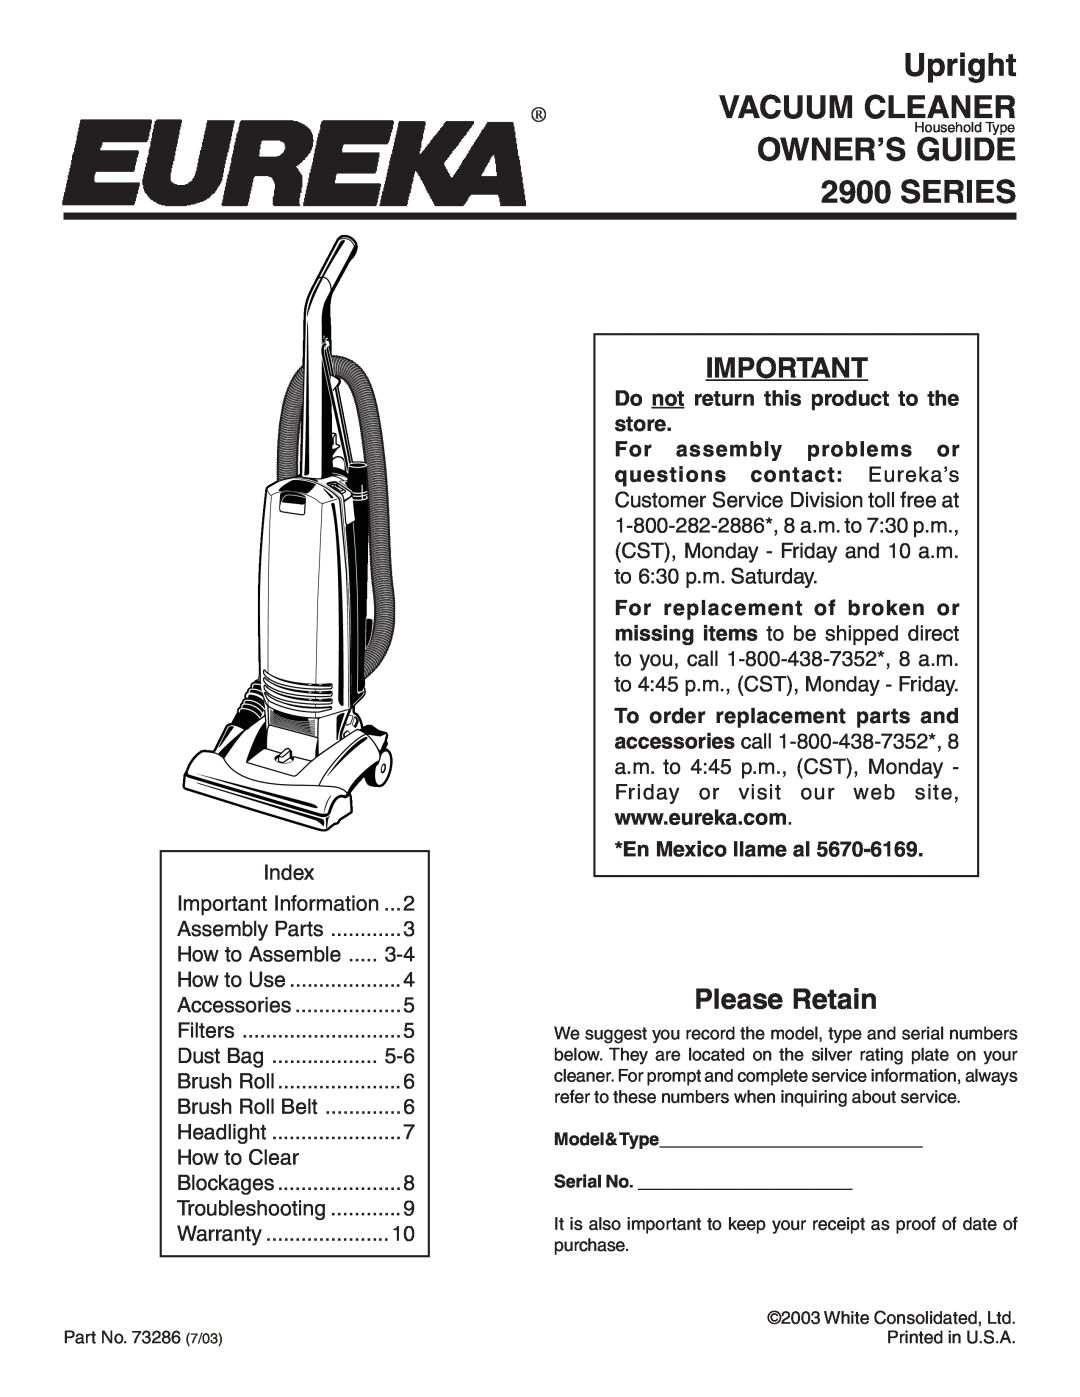 Eureka 2900 Series warranty Please Retain, Upright, Vacuum Cleaner, Owner’S Guide, Index, Important Information, Filters 